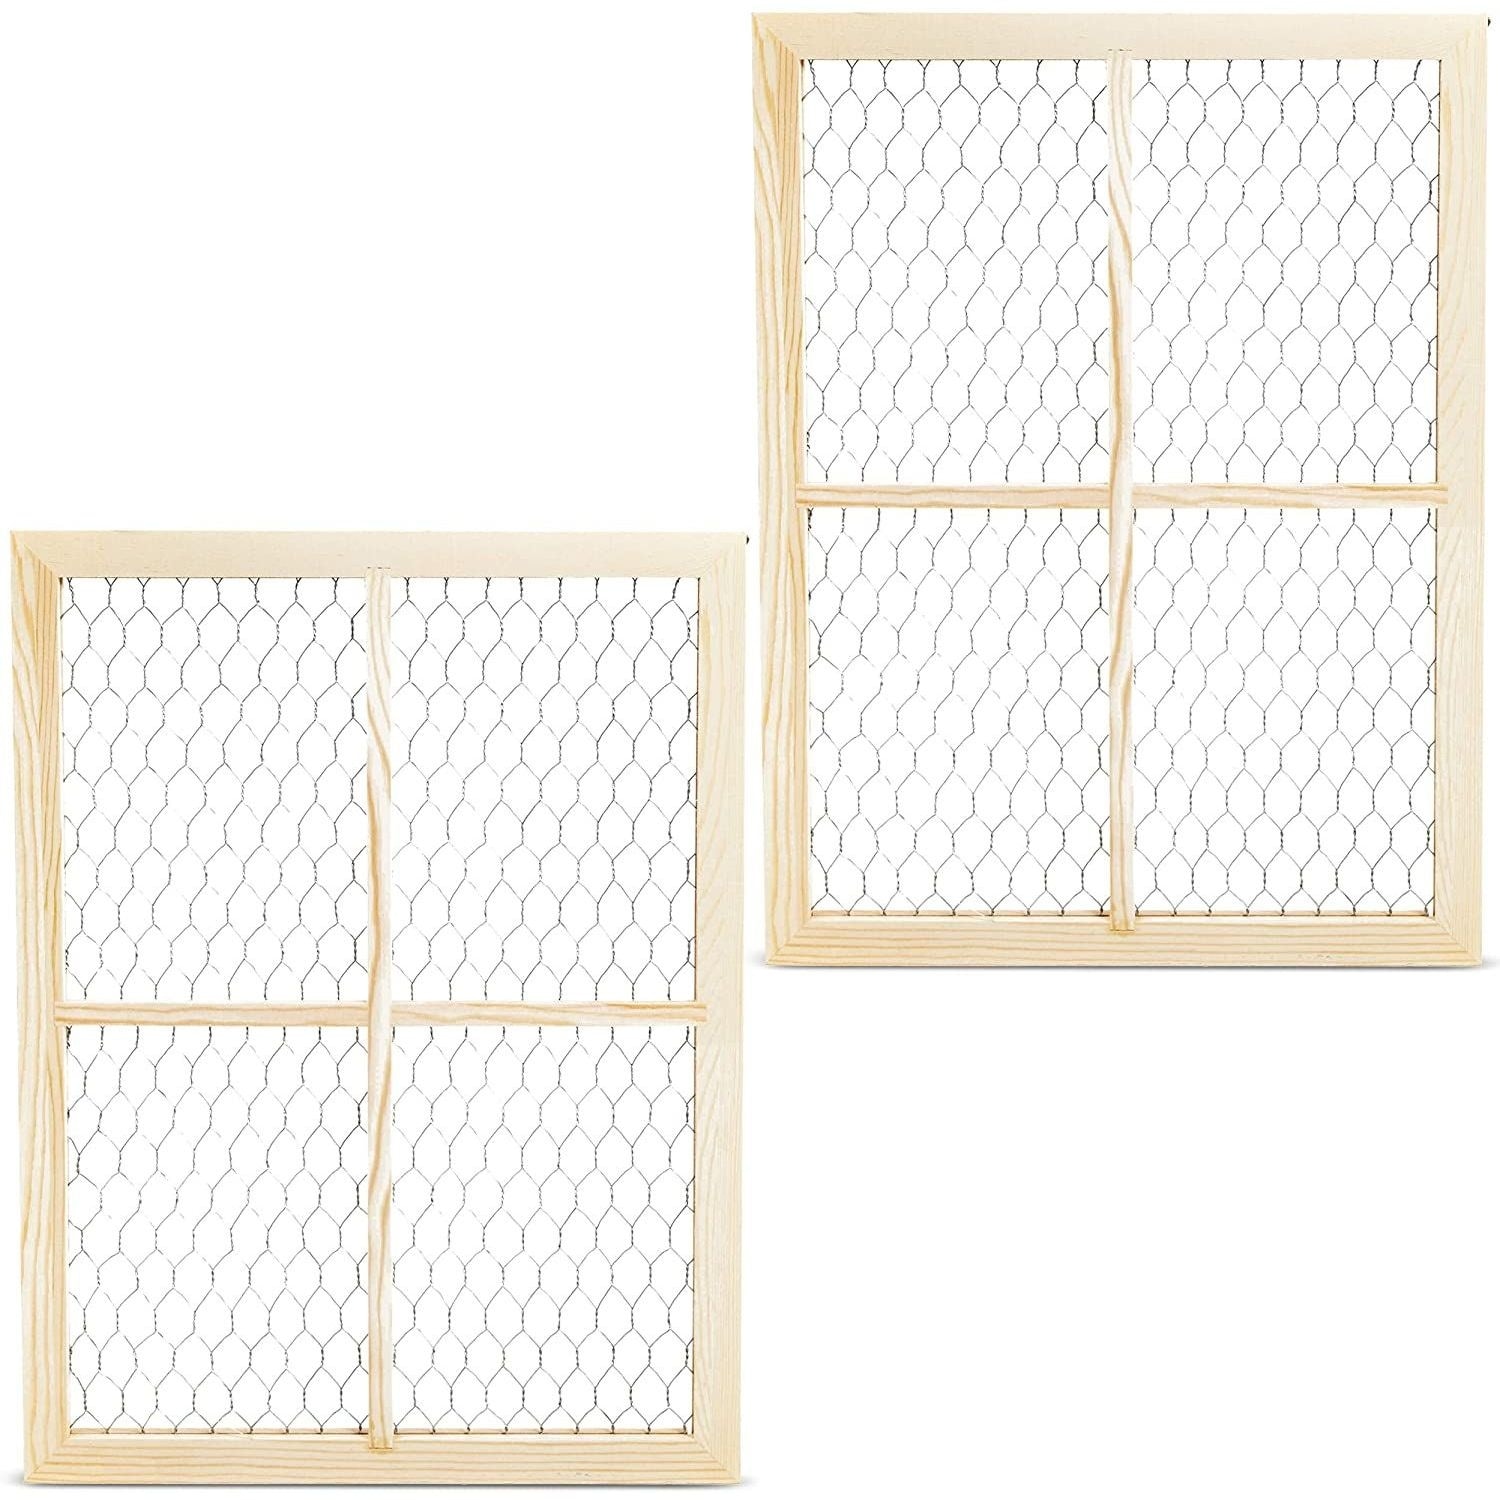 Chicken Wire Frame 12 x 16 Unfinished Wood Frame Ready to Decorate, 2  Pack - On Sale - Bed Bath & Beyond - 31663012